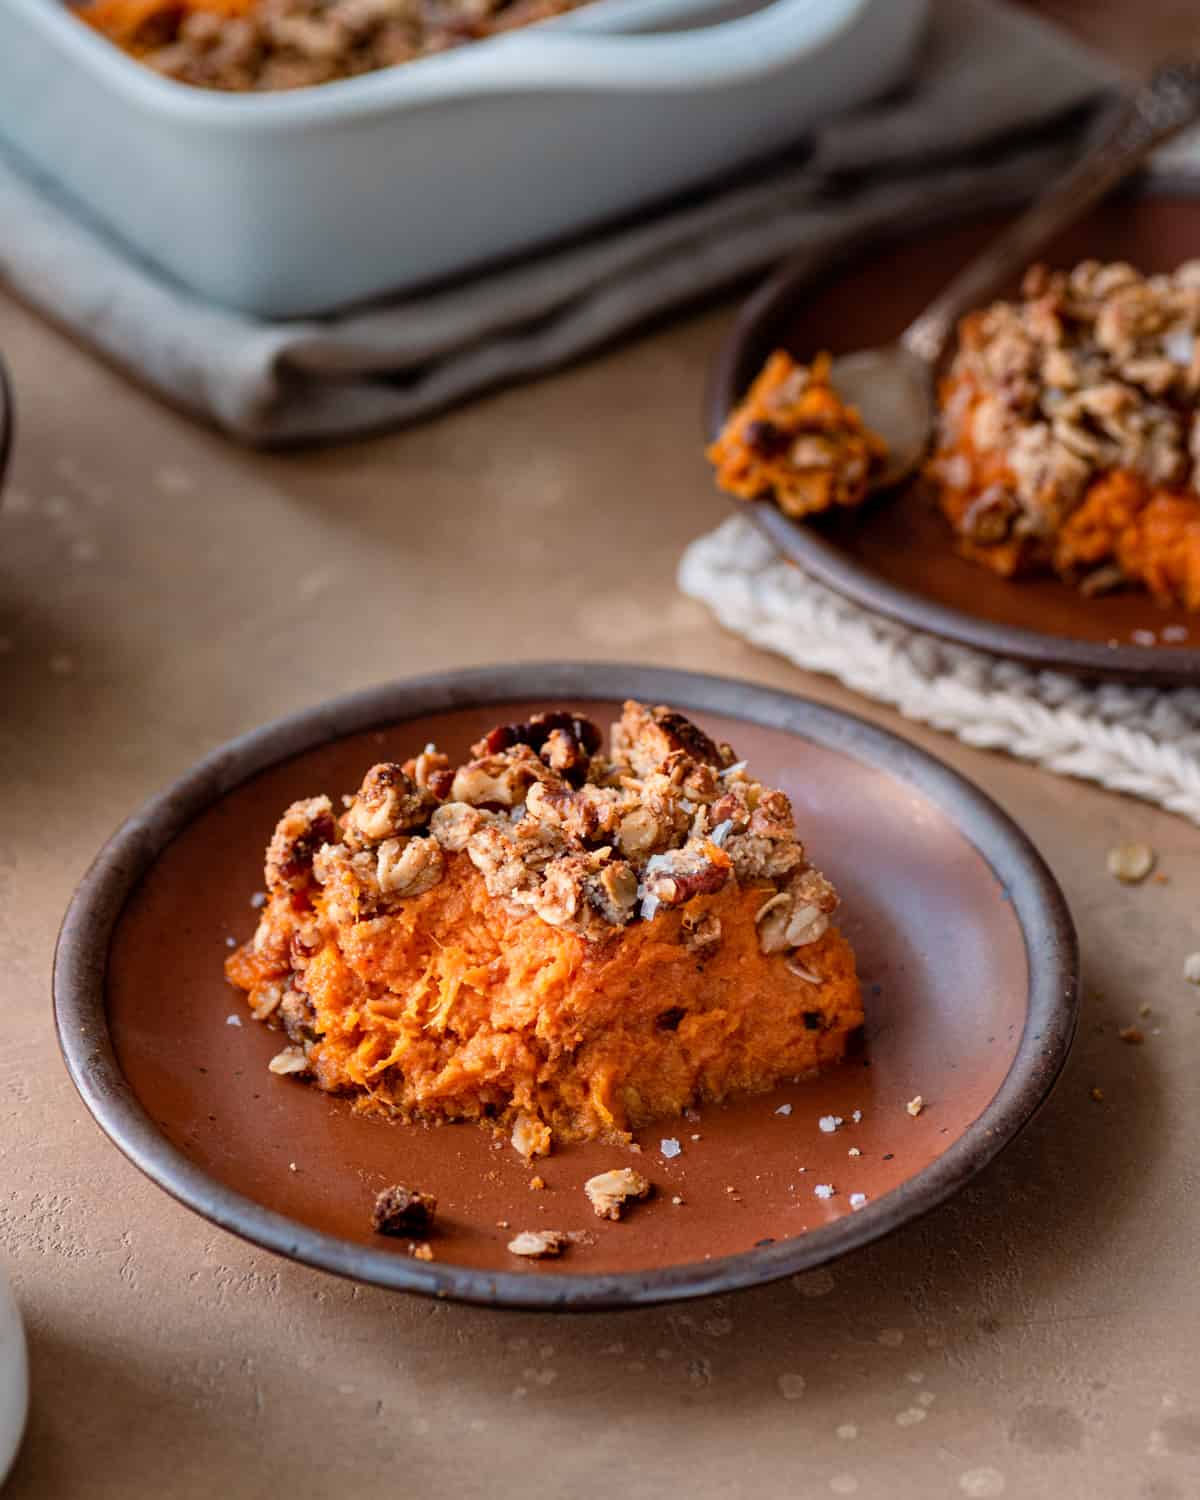 One piece of sweet potato casserole on a brown plate on a table.